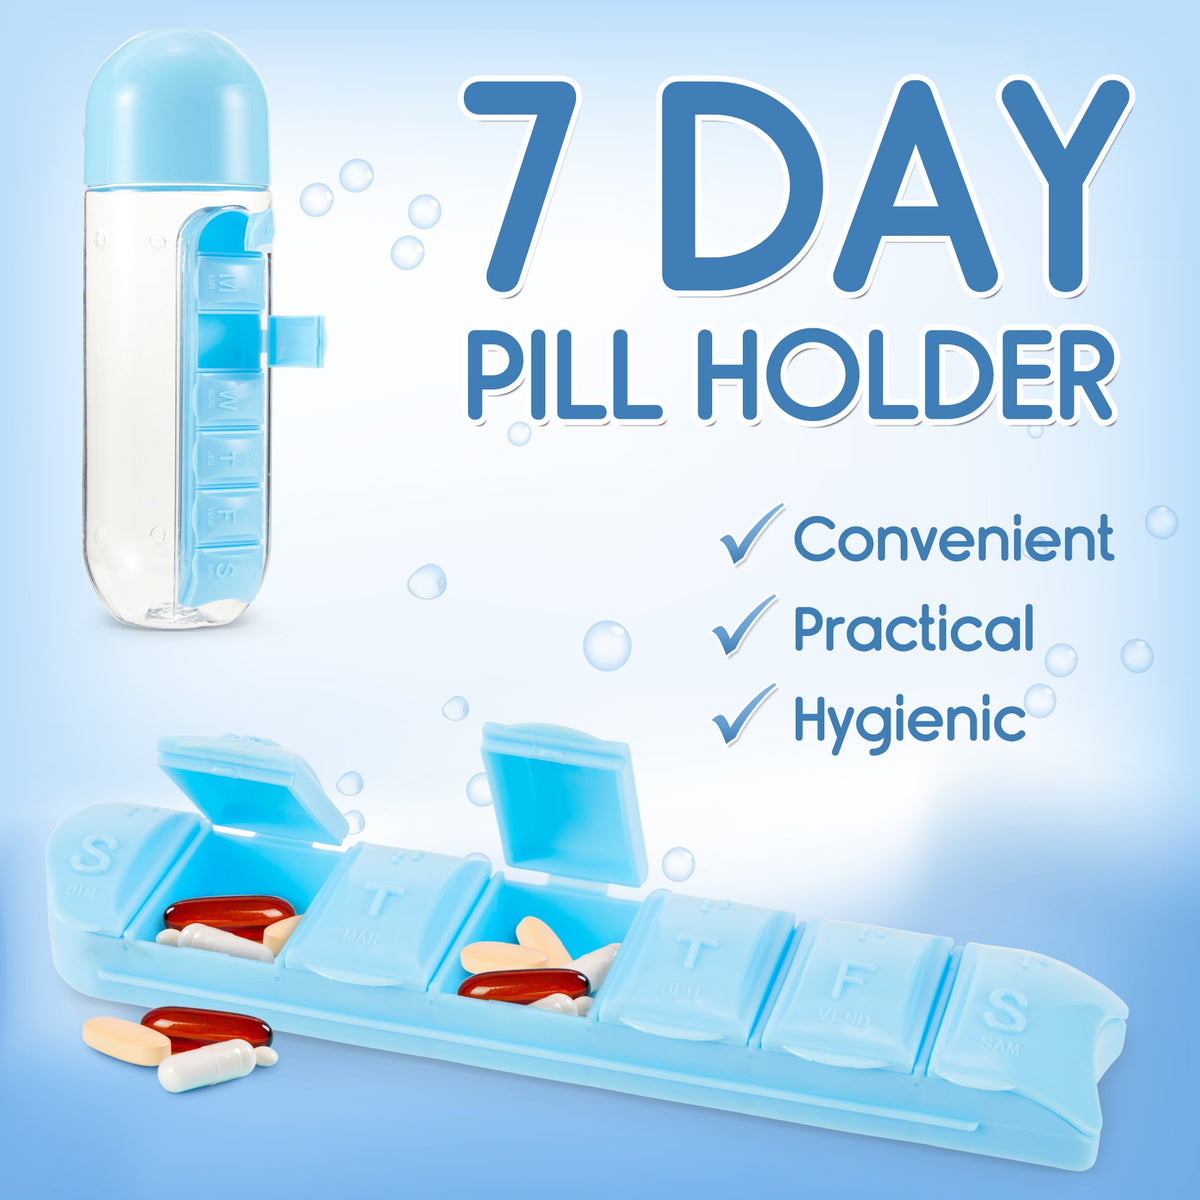 20 oz Water Bottle with Built-In Pill Box, Daily Pill Organizer - 7 Day Pill Holder, Easy-to-Clean Travel Pill Container, Slide-Out Design, Efficient Pill Organizer for Everyday Use